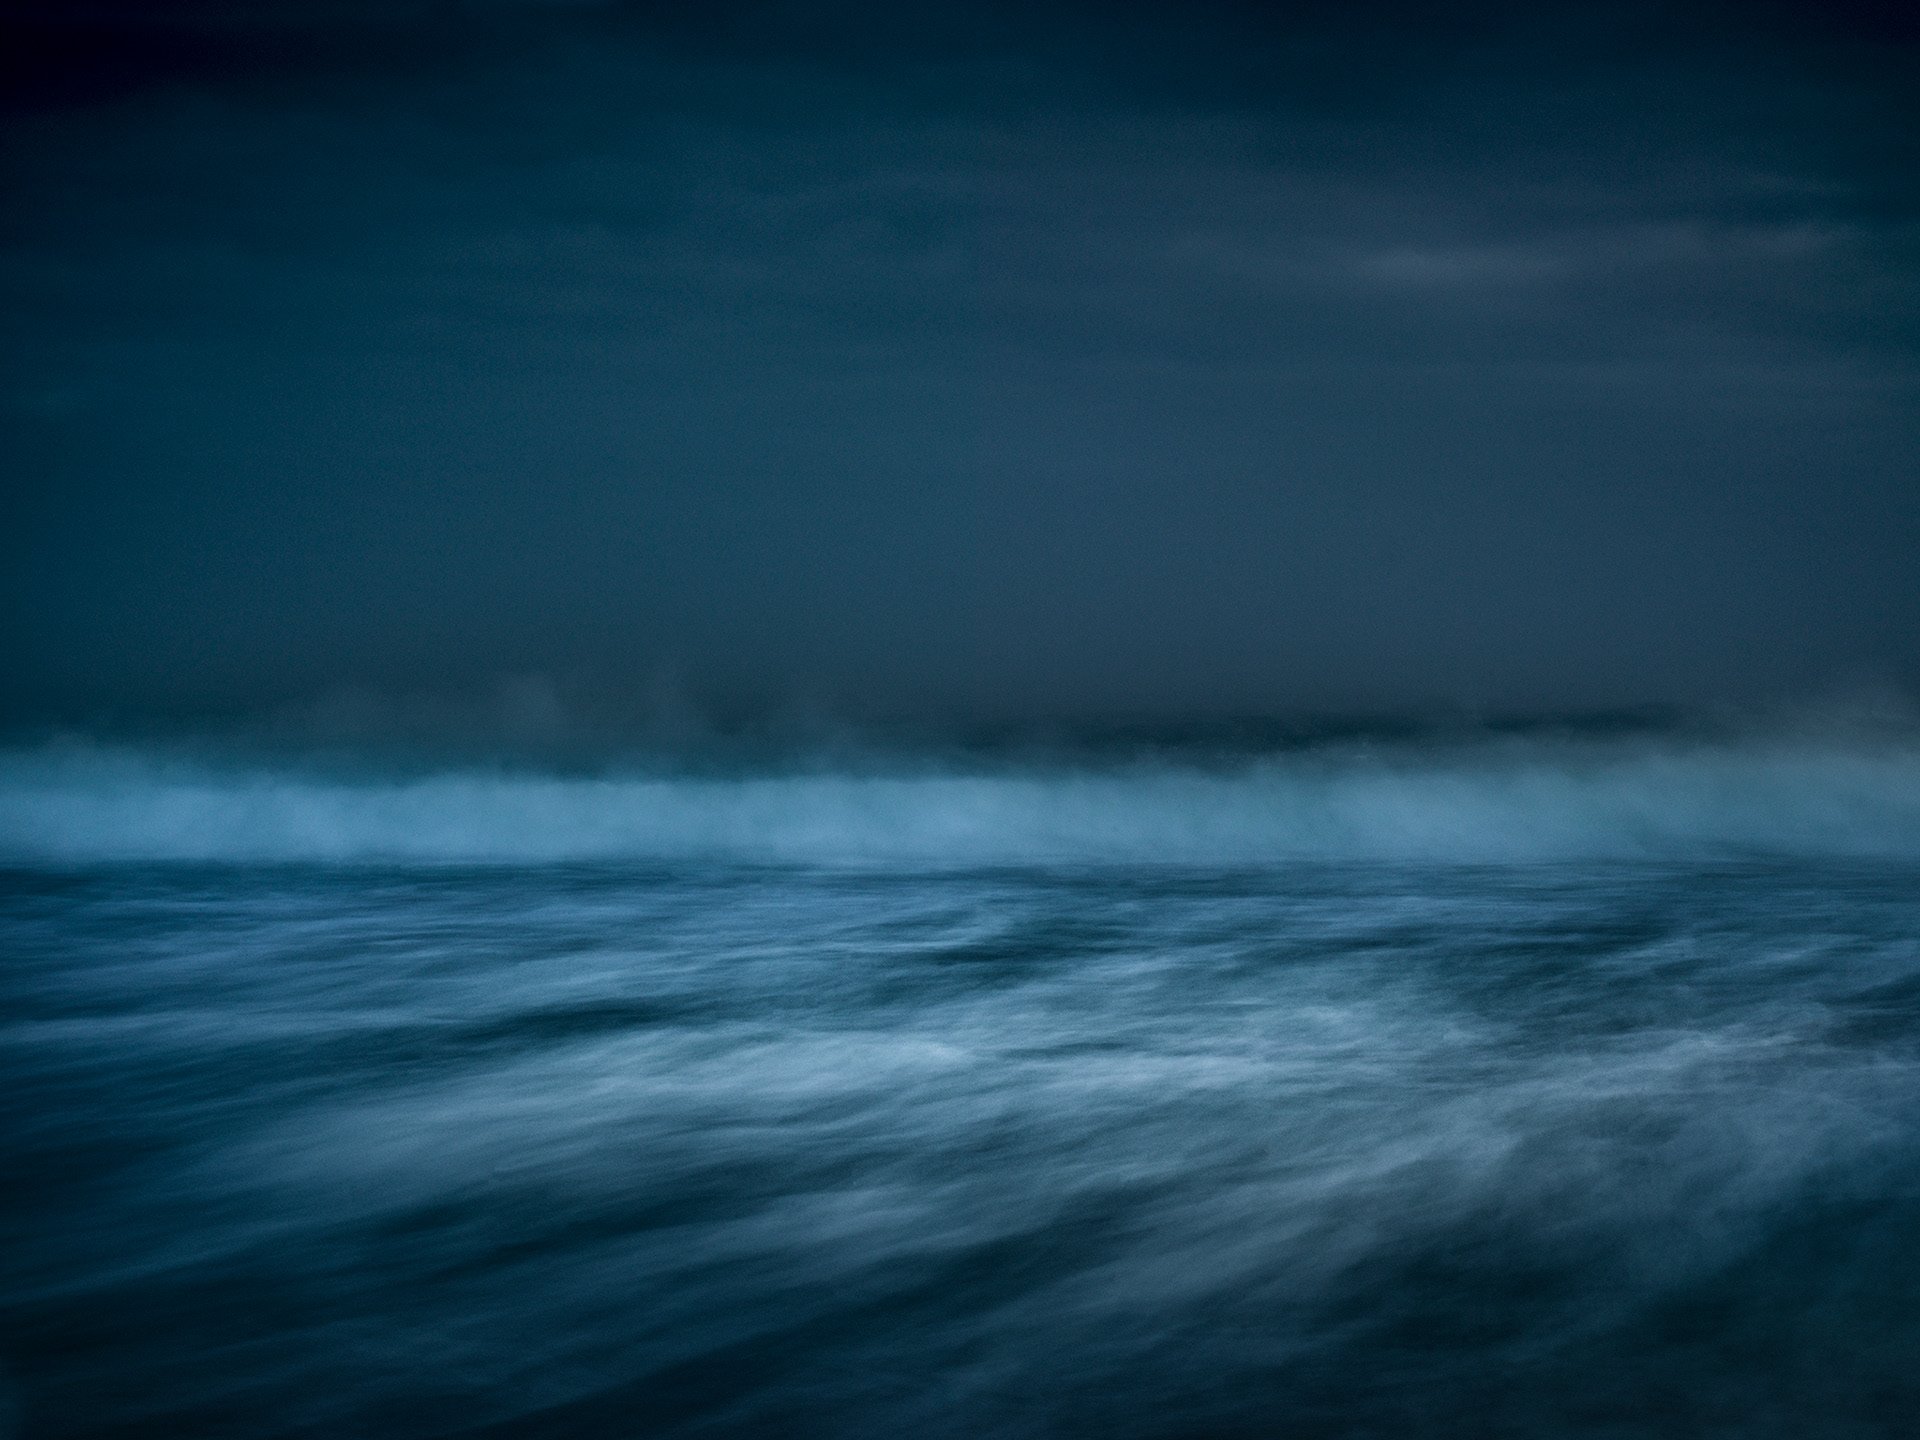 Dive Into the Painterly Nocturnal Seascapes of Antti Viitala